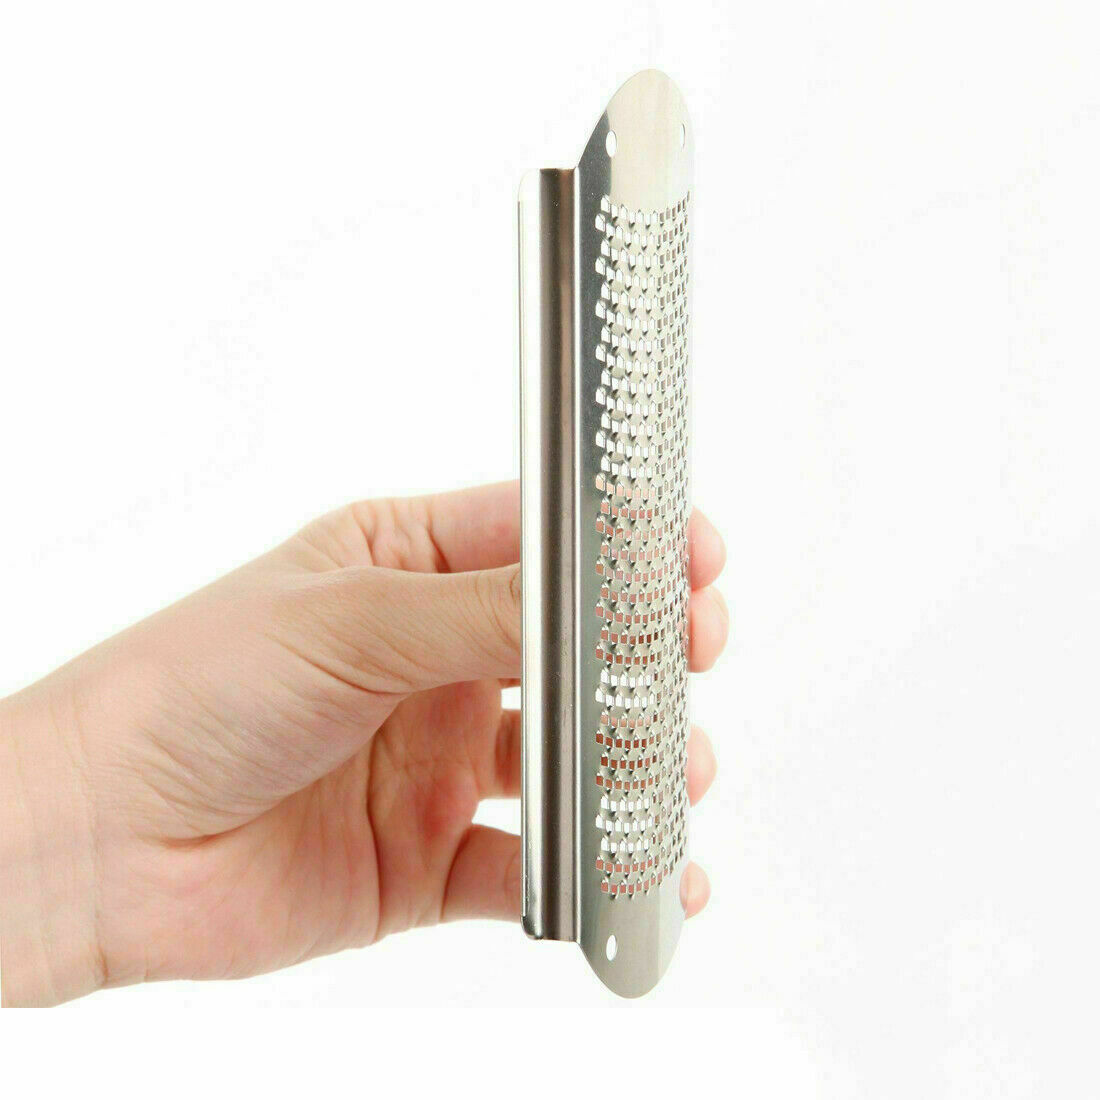 Pro 2 In1 Foot Callus Remover File  Stainless Steel  Pedicure Tools